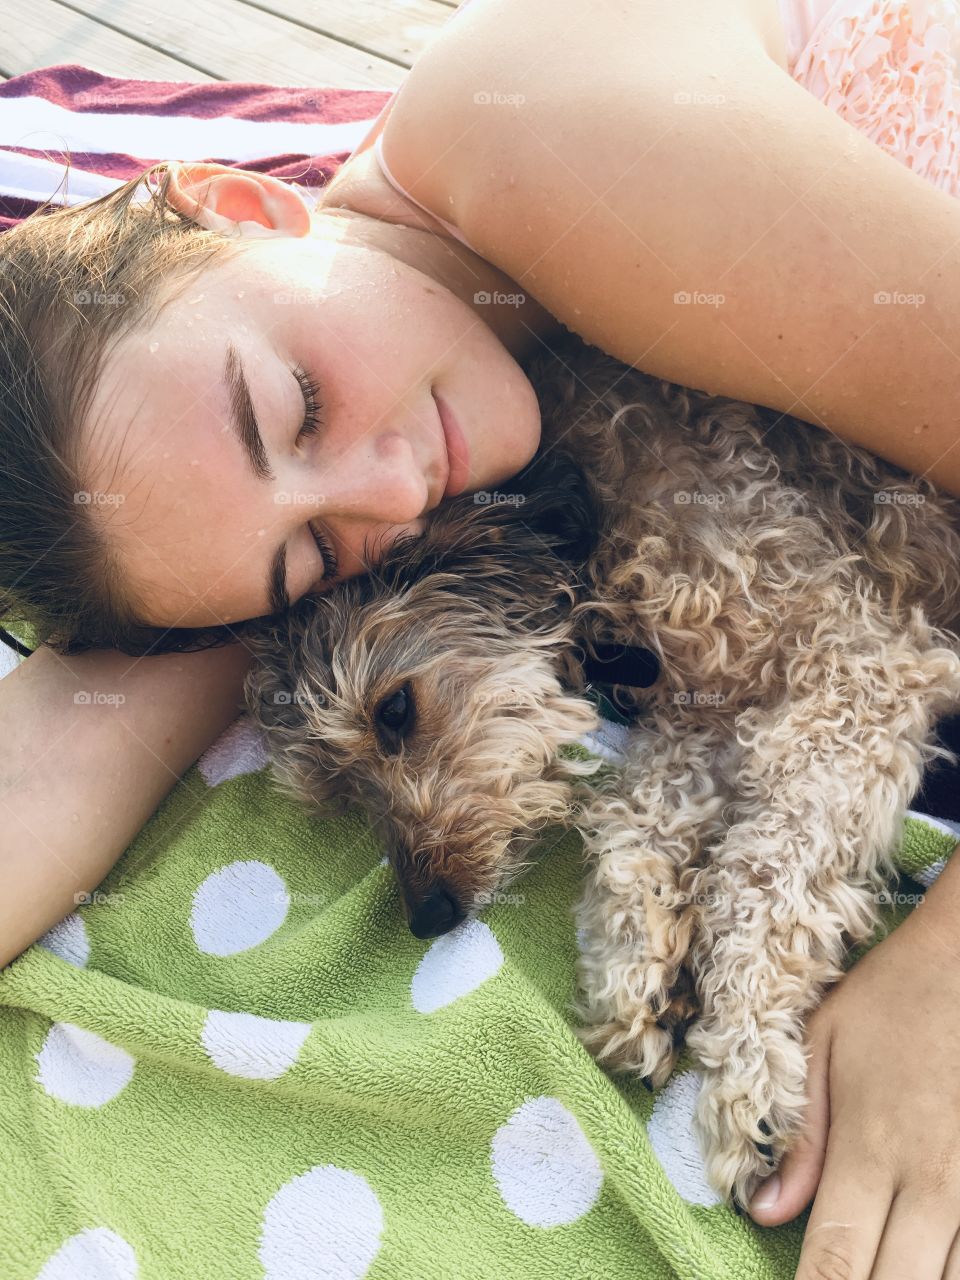 A young girl and her dog rest after playing at the lake on a warm summer day, cuddling on a beach towel